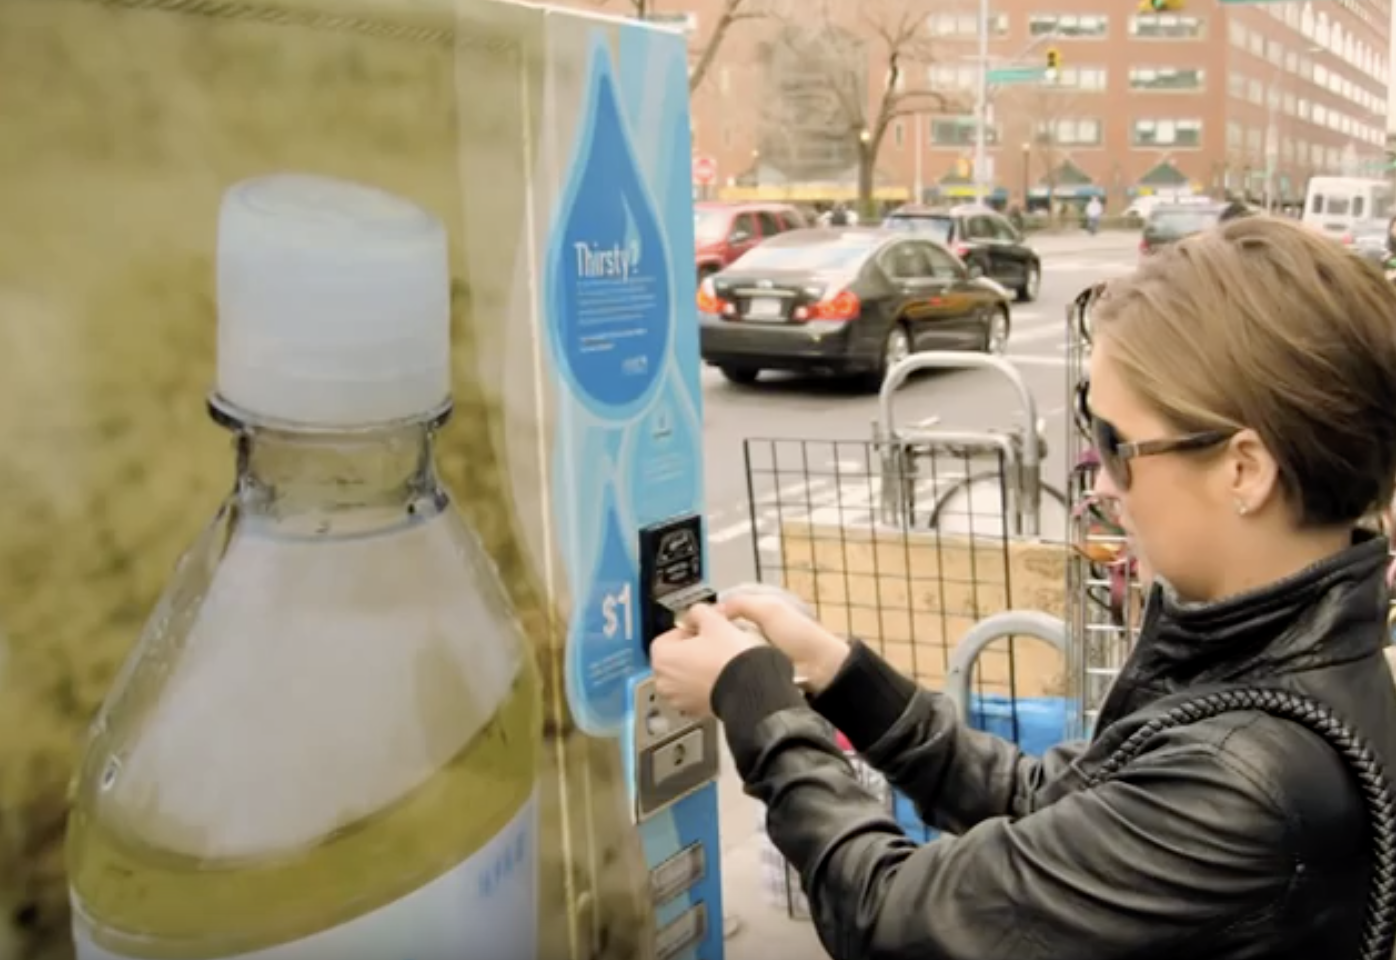 This UNICEF guerrilla creates positive change in the world